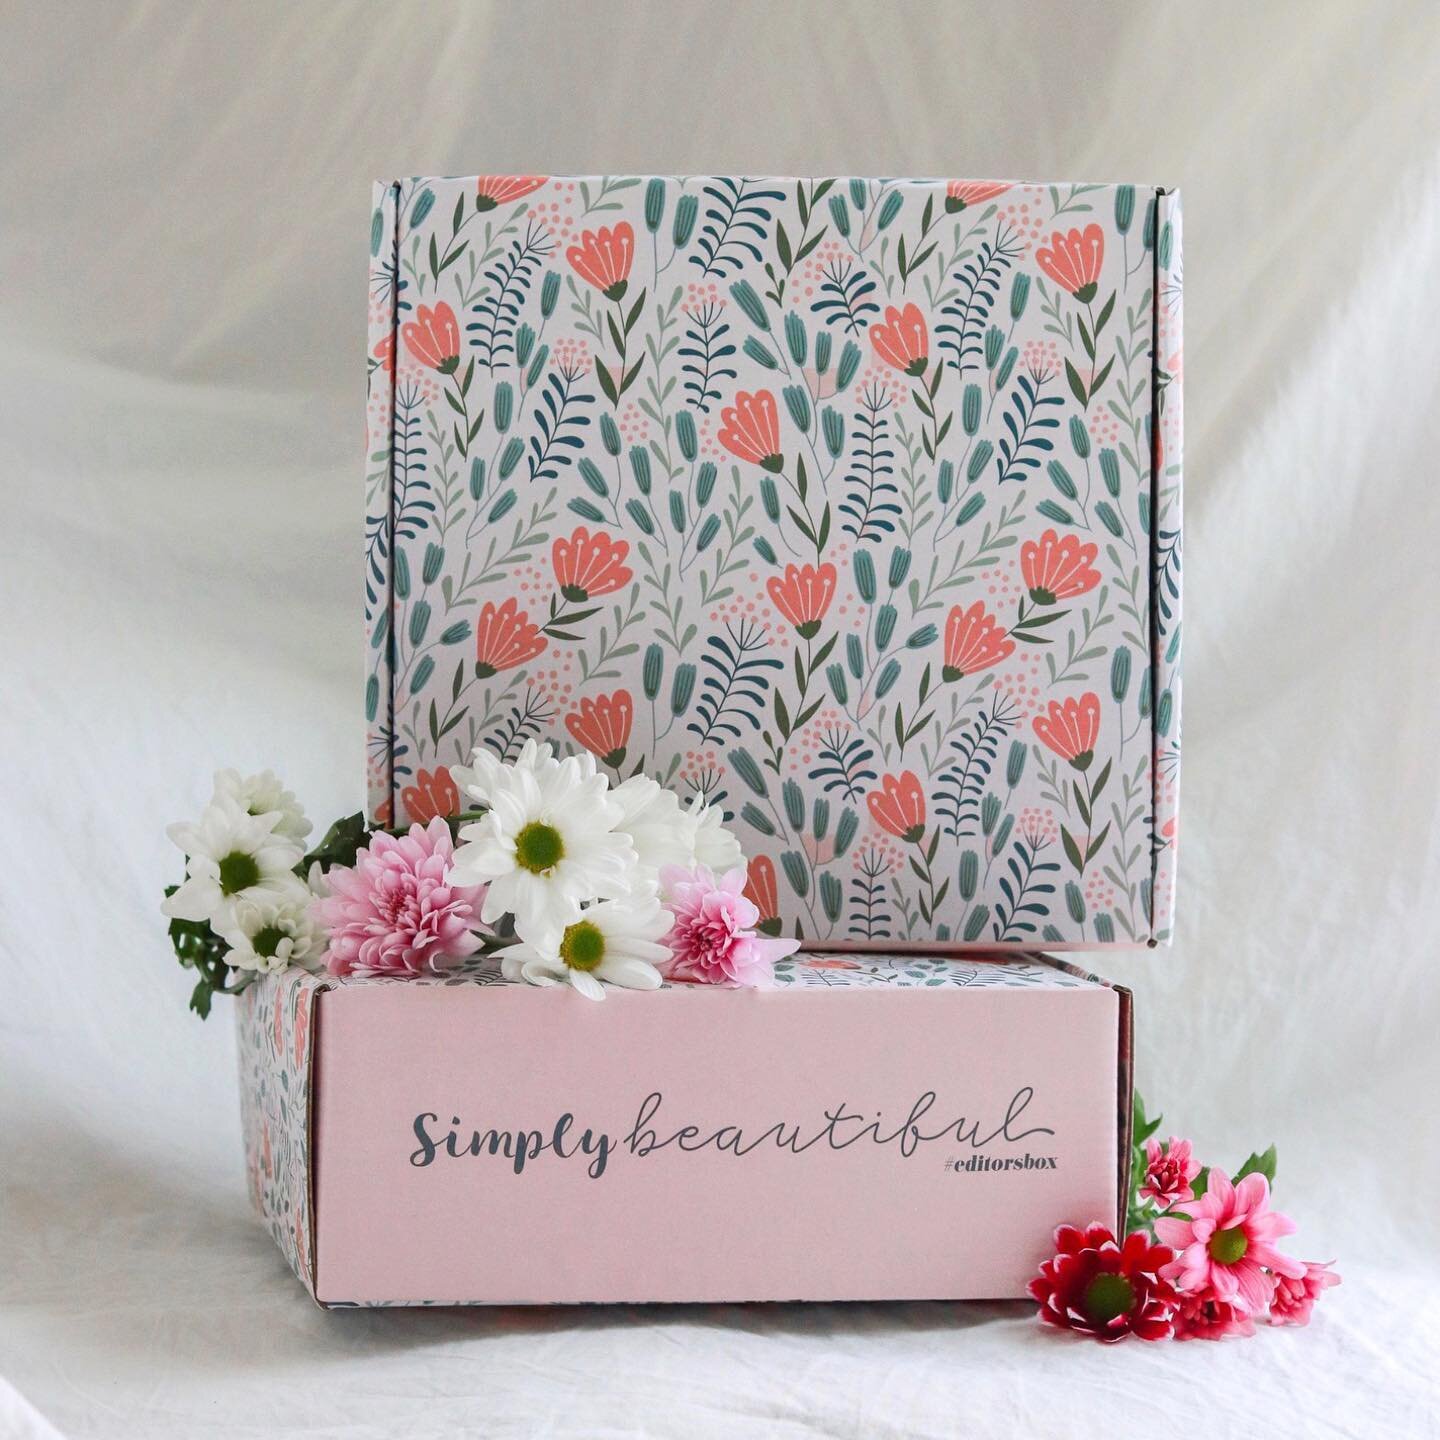 Spring 2021 box photography for @simplybeautifulbox and @extraordinarymanbox. Love how the addition of simple flowers adds a pop of freshness to the look &mdash; note that we picked different flowers to match each box while sticking to a cohesive Spr